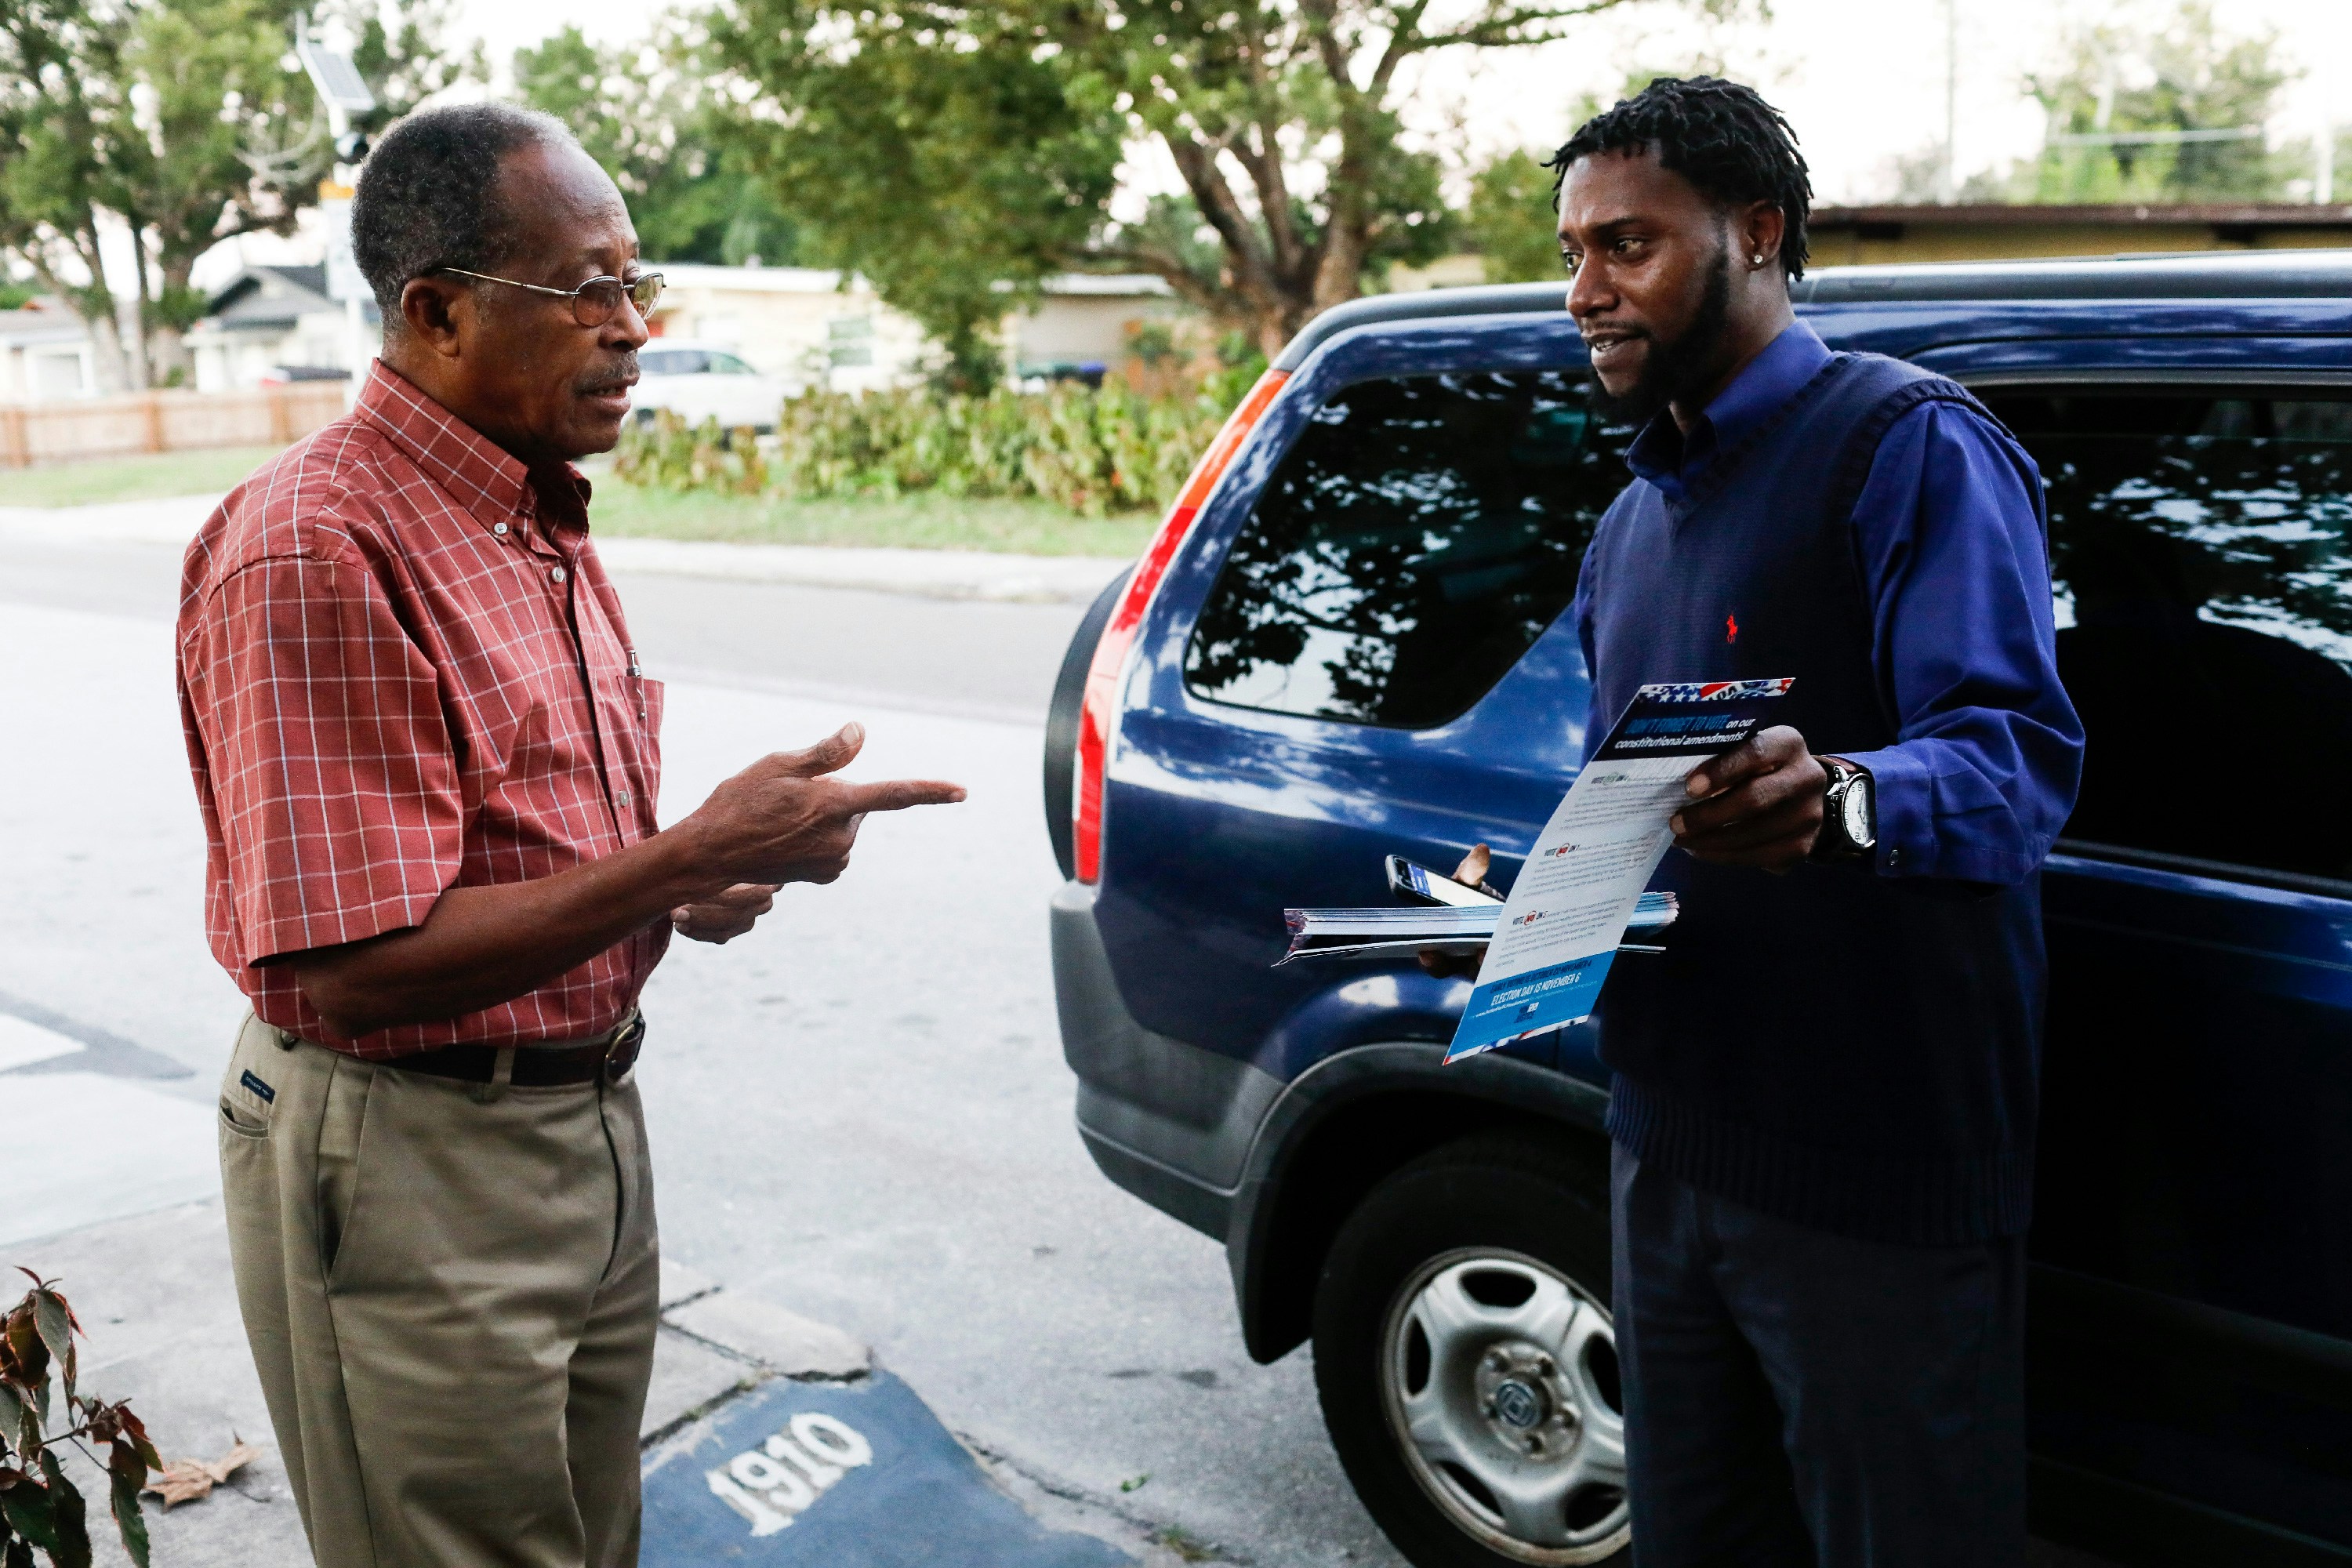 Travis Hailes talks to Mony Dorce about voting while canvassing in Orlando on Monday, October 29, 2018. In the upcoming election on November 6, Floridians will have the opportunity to vote on Amendment 4, which would give people who have been convicted of a felony the restored right to vote. Credit: Eve Edelheit for The Intercept